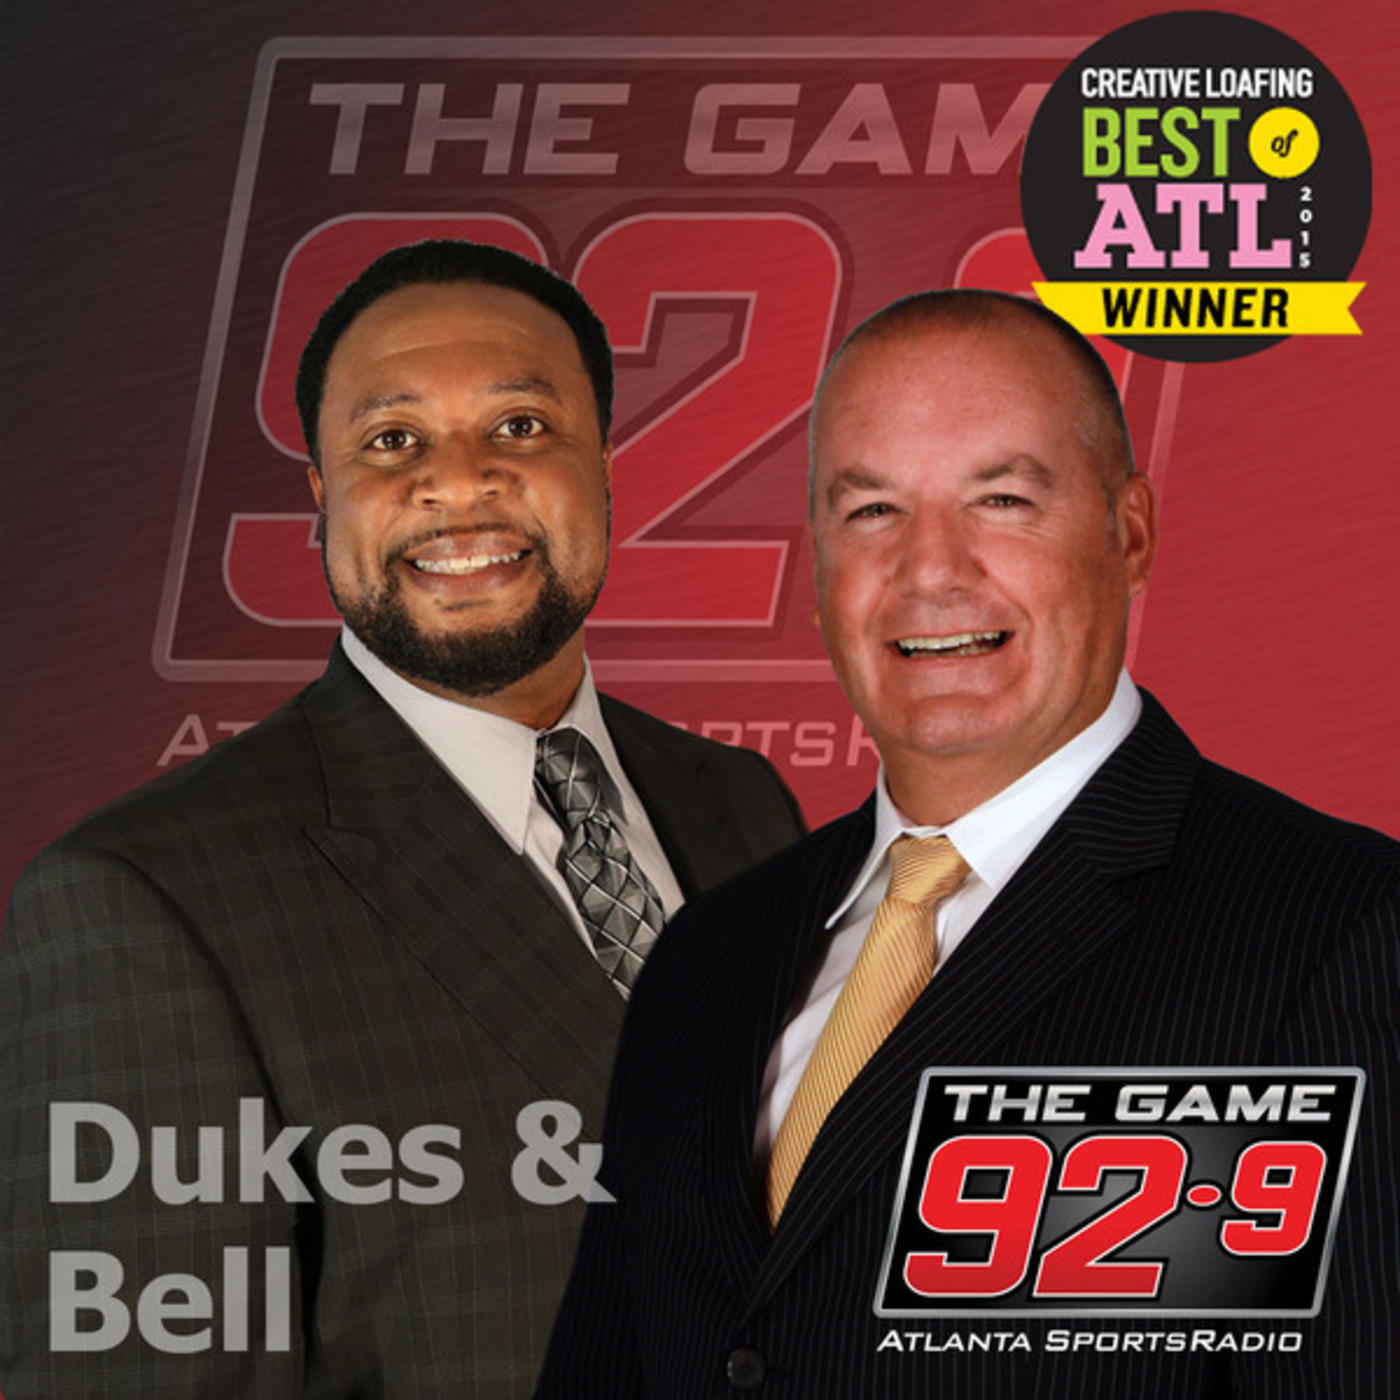 4-14-21 DUKES AND BELL 3PM HOUR